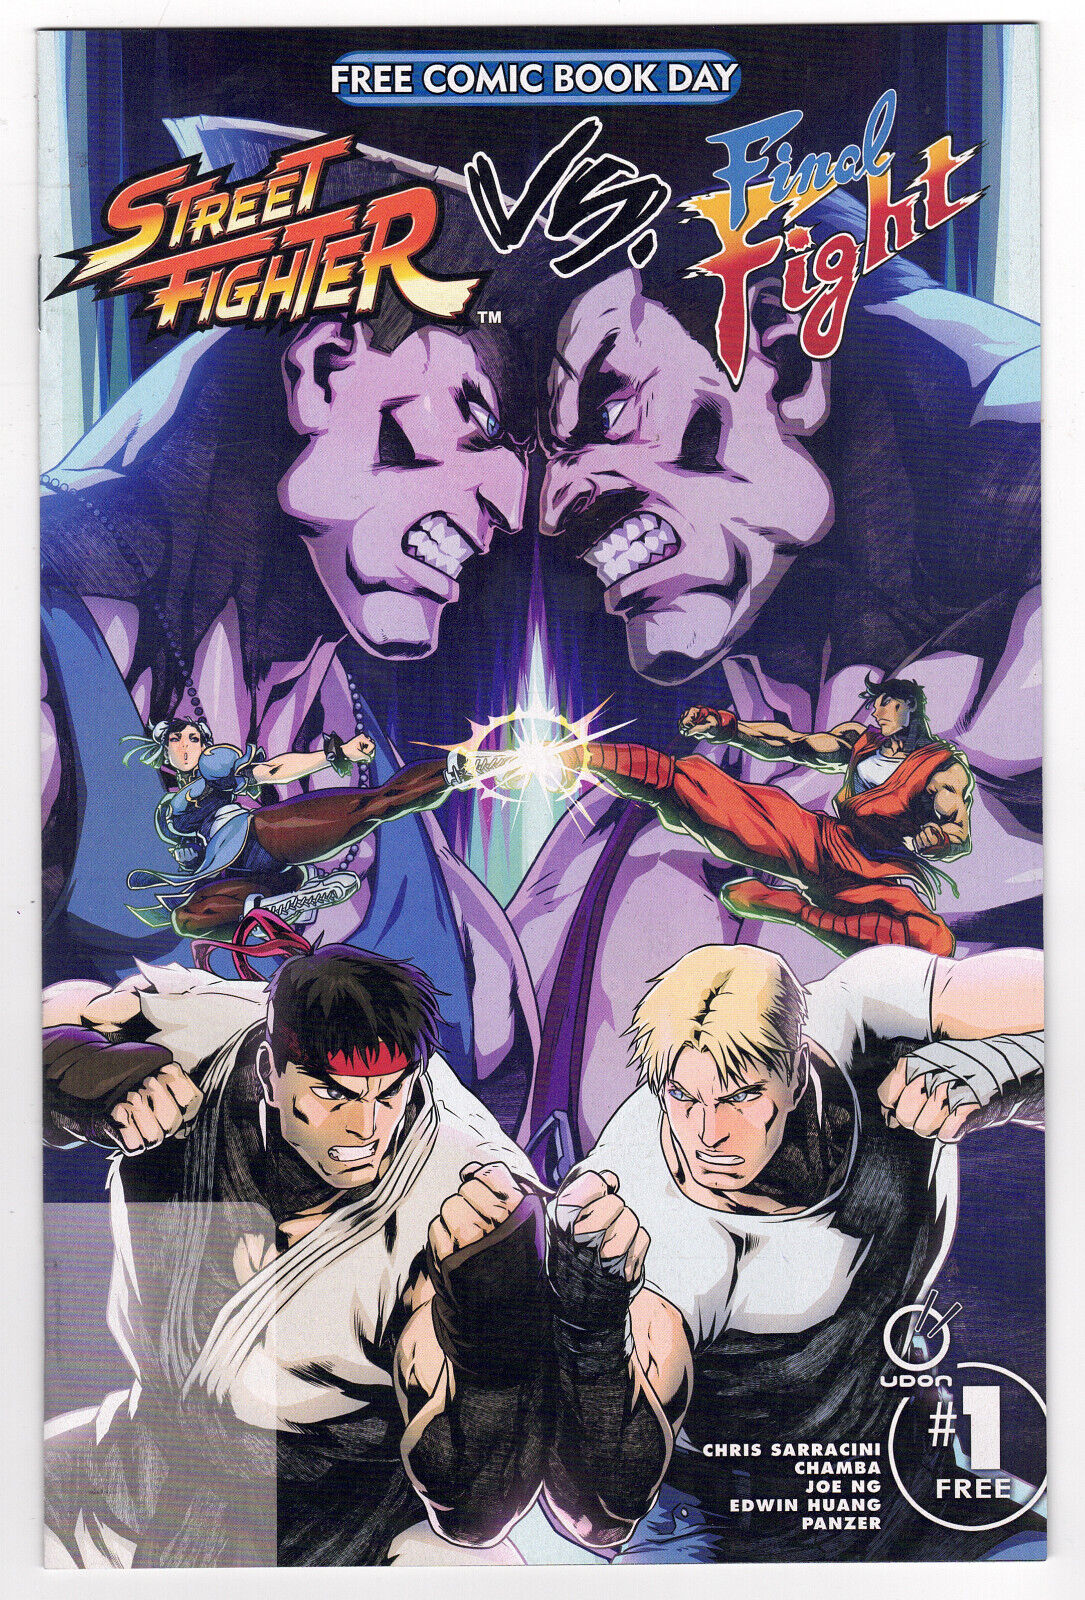 FCBD 2024 Free Comic Book Day STREET FIGHTER FINAL FIGHT 1 Udon UNREAD UNSTAMPED